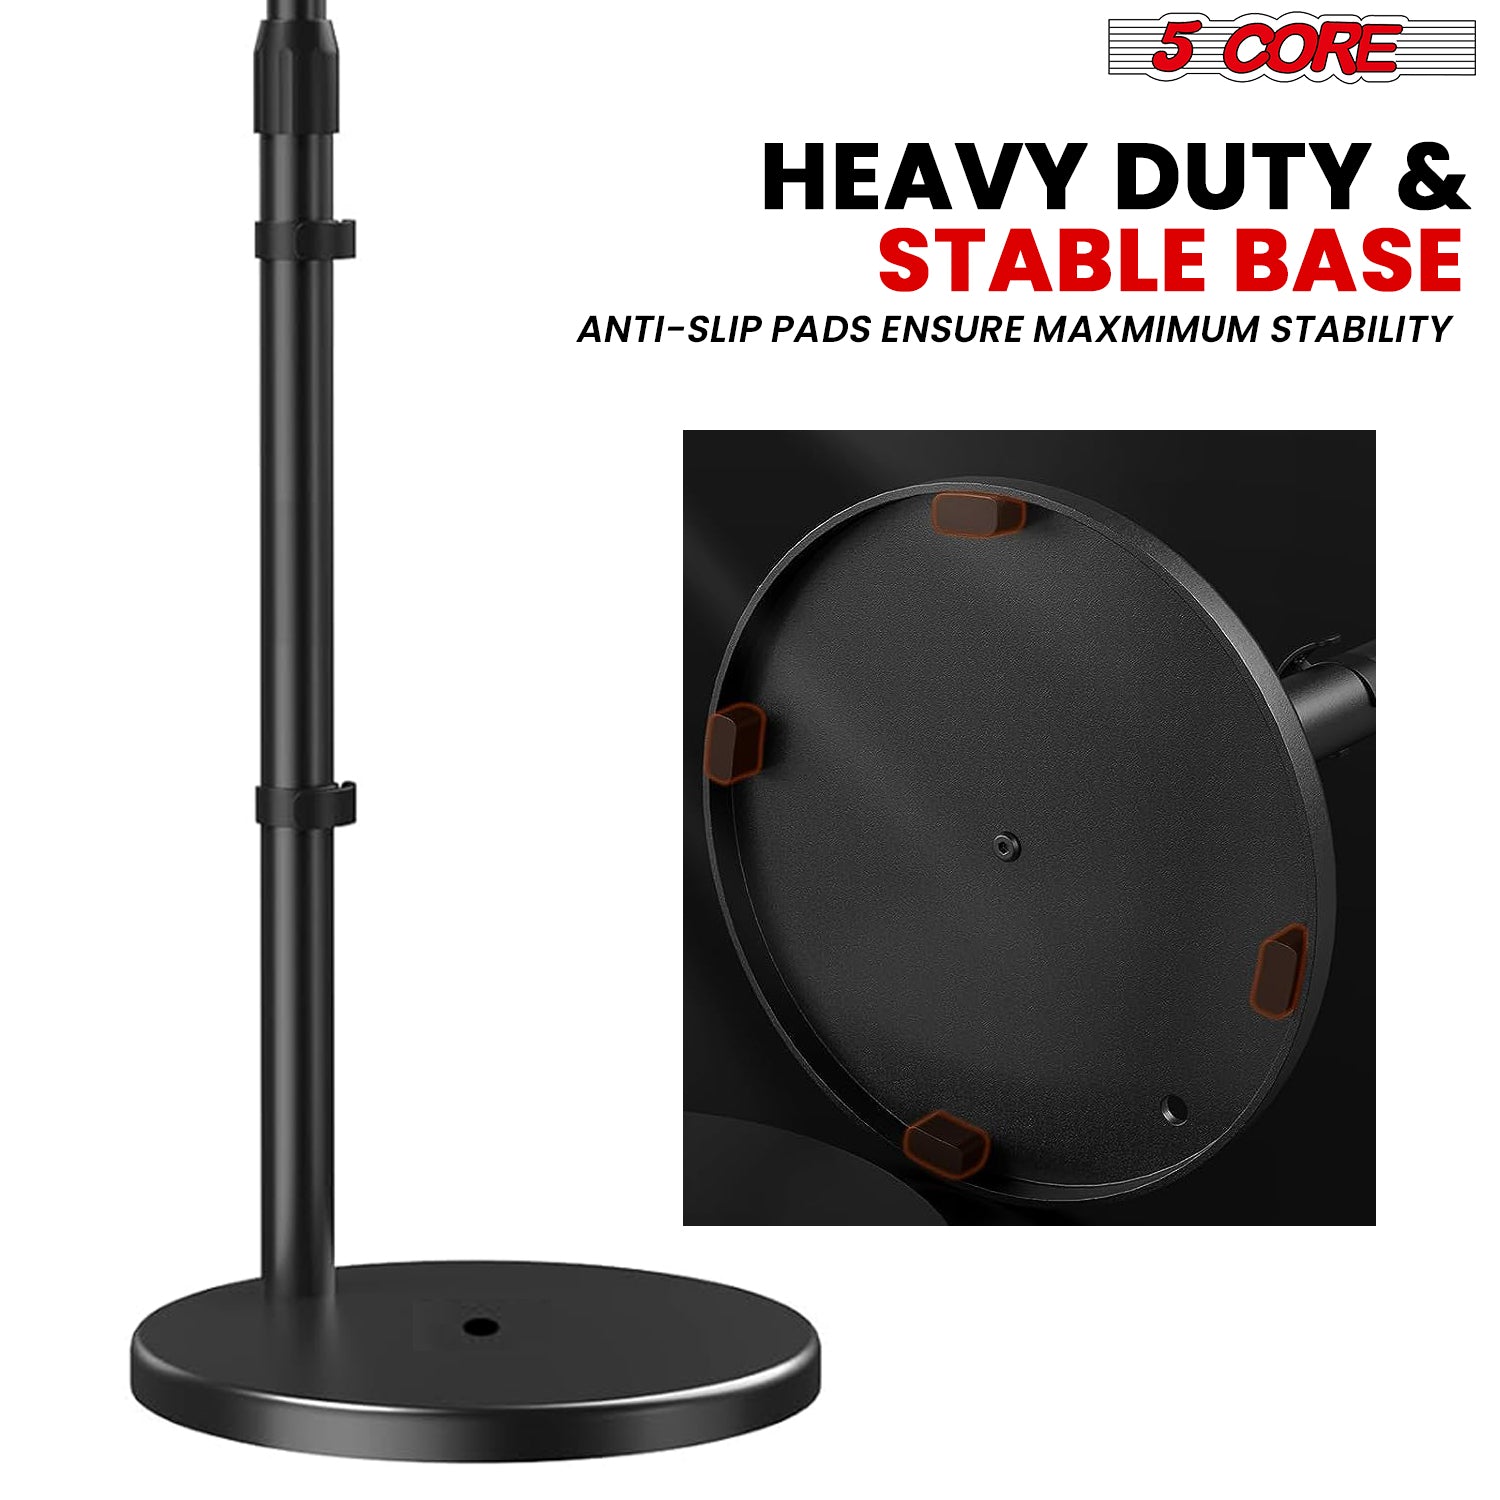 Heavy duty & stable base projector stand